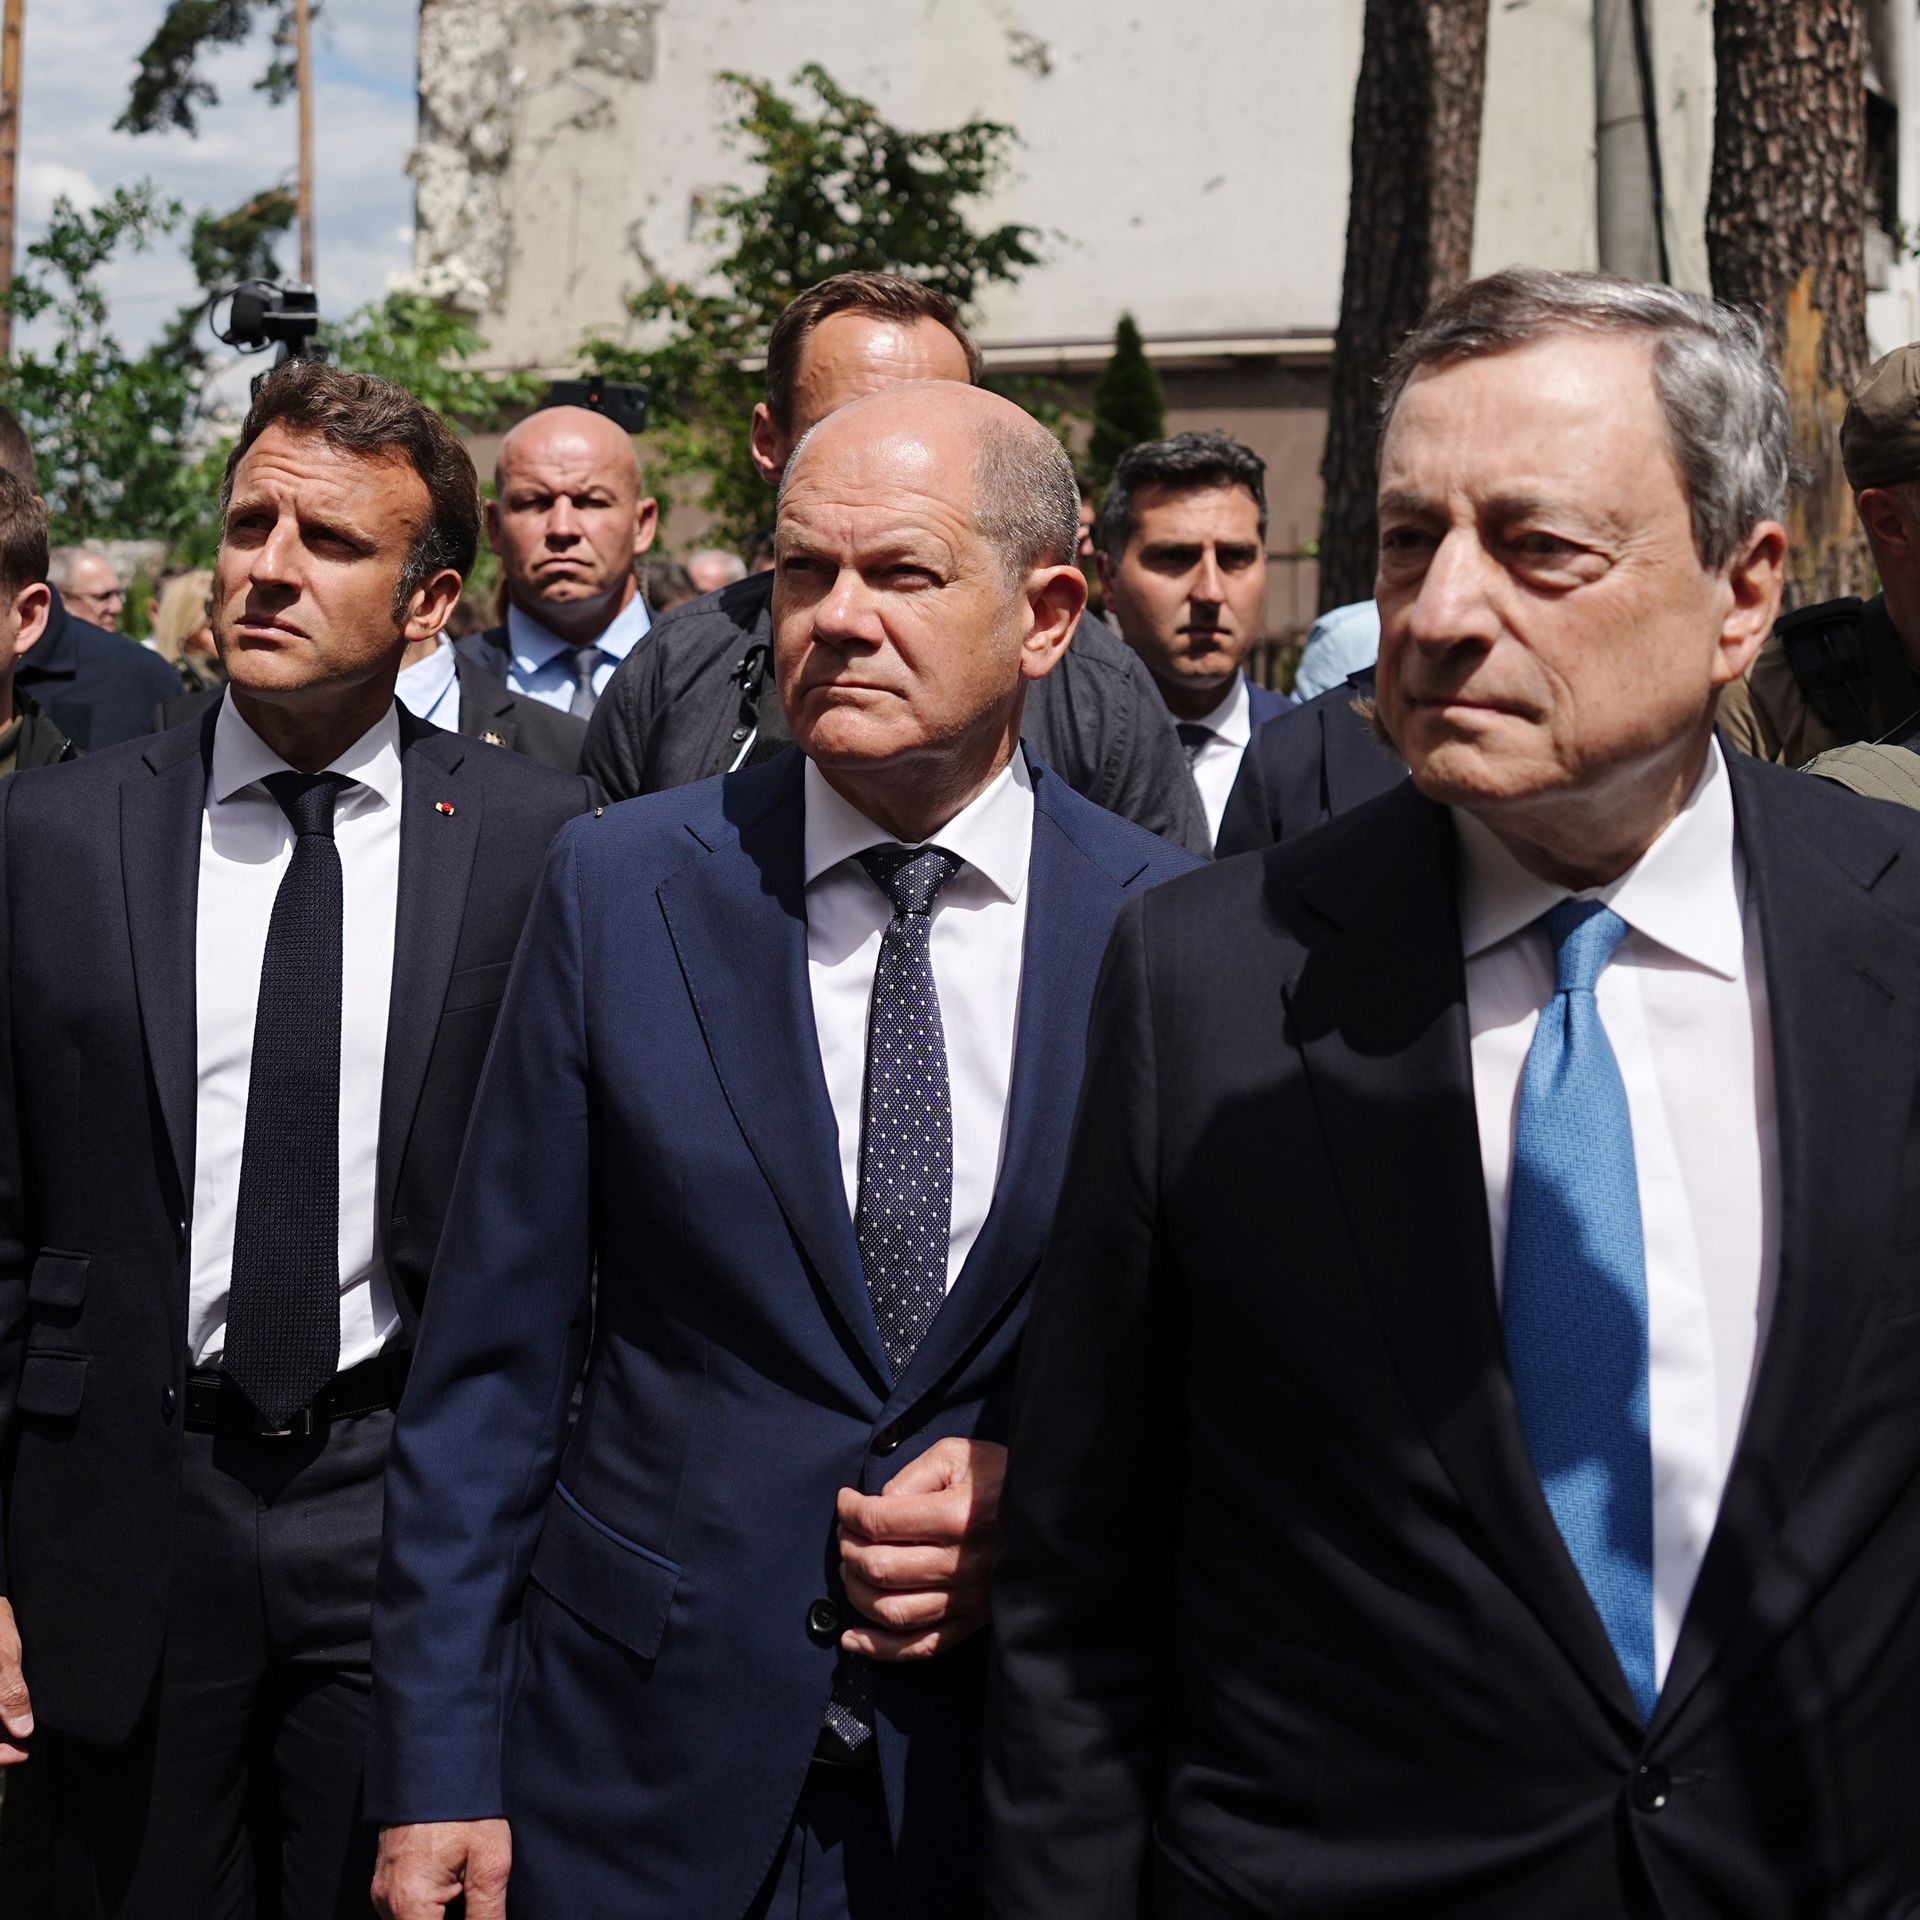 French President Emmanuel Macron, Italian Prime Minister Mario Draghi and German Chancellor Olaf Scholz visit the devastated Kyiv suburb of Irpin on Thursday.